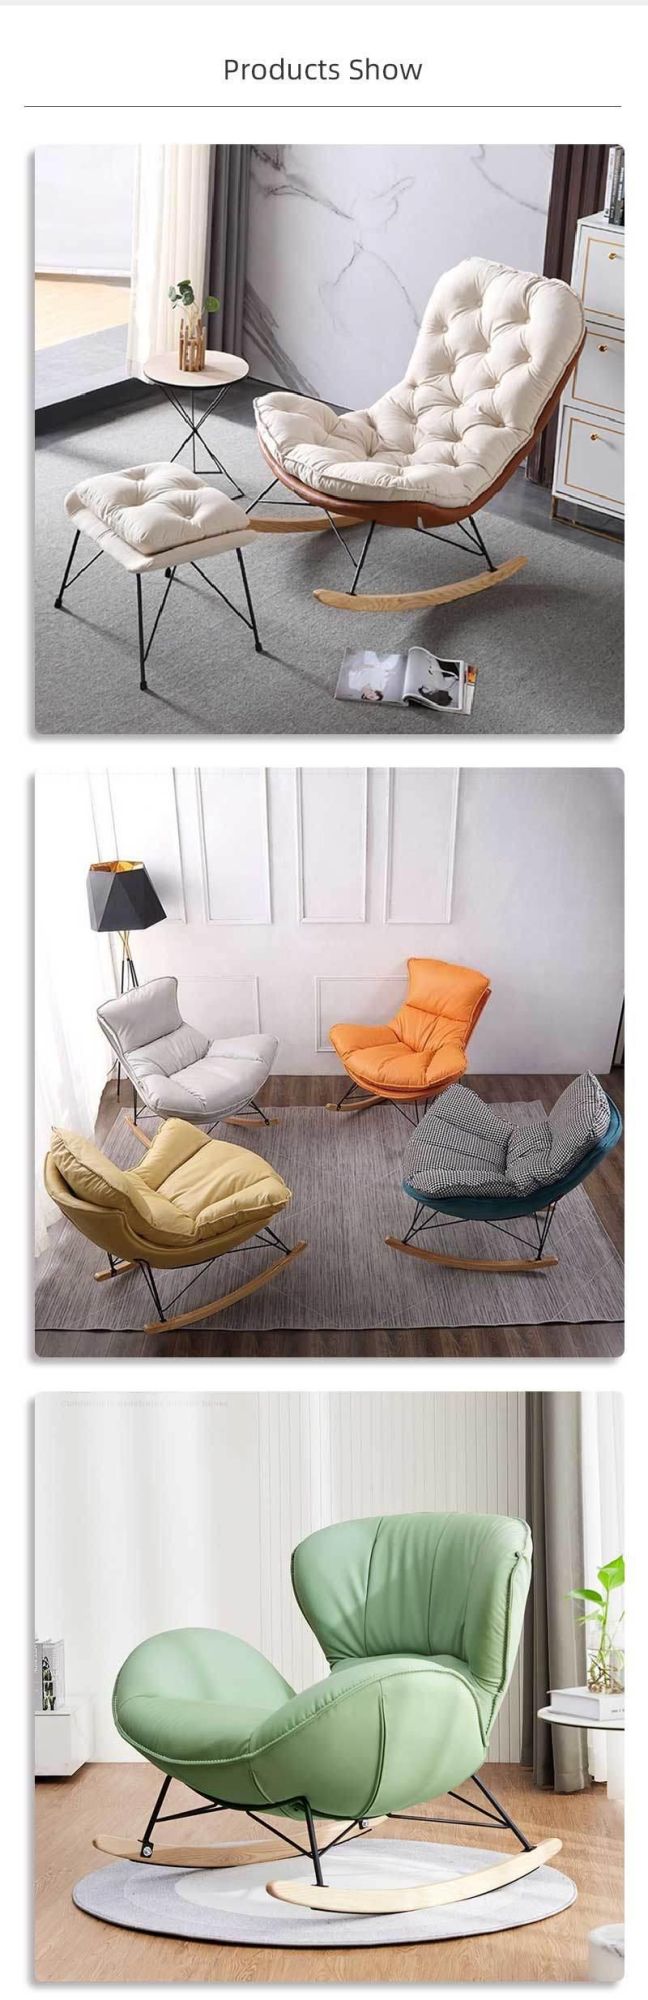 Nordic Simple Furniture Designer Egg Sofa Chair Leather Leisure Computer Chair